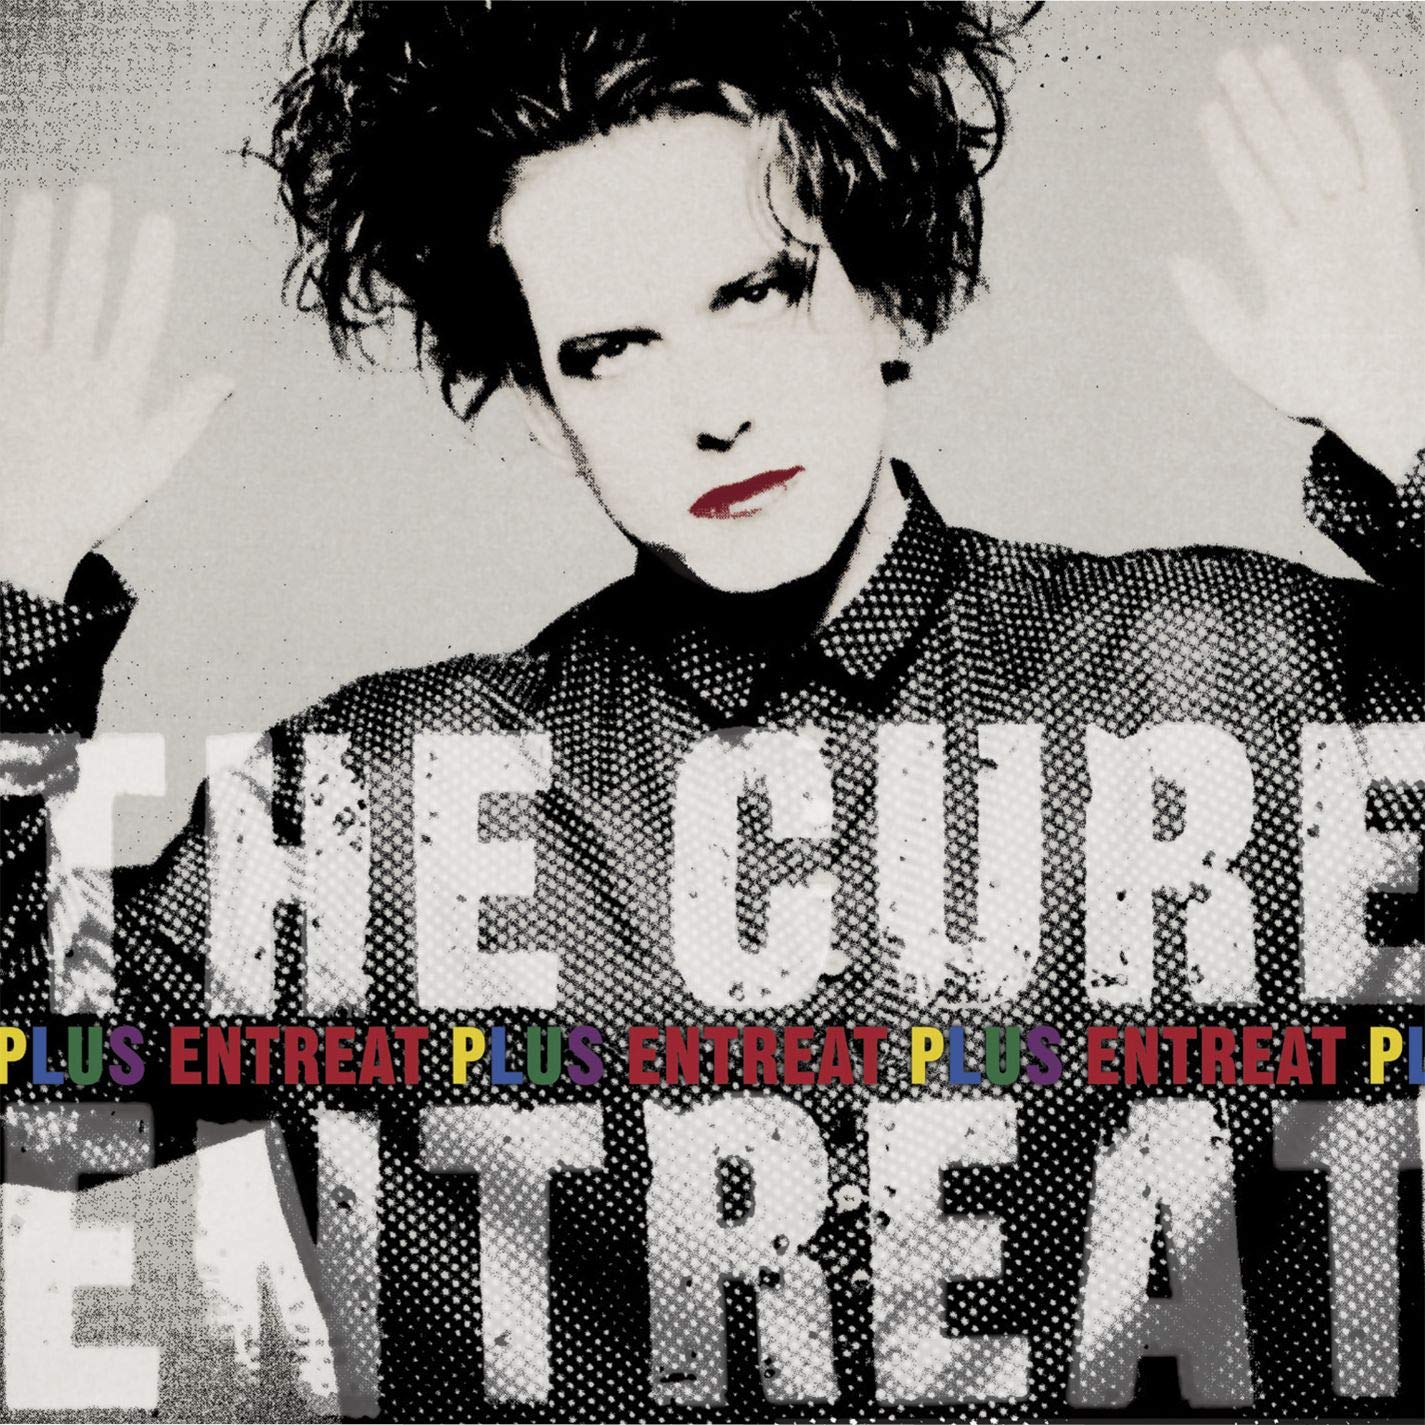 The Cure: Entreat Plus (remastered) (180g) 2 lps